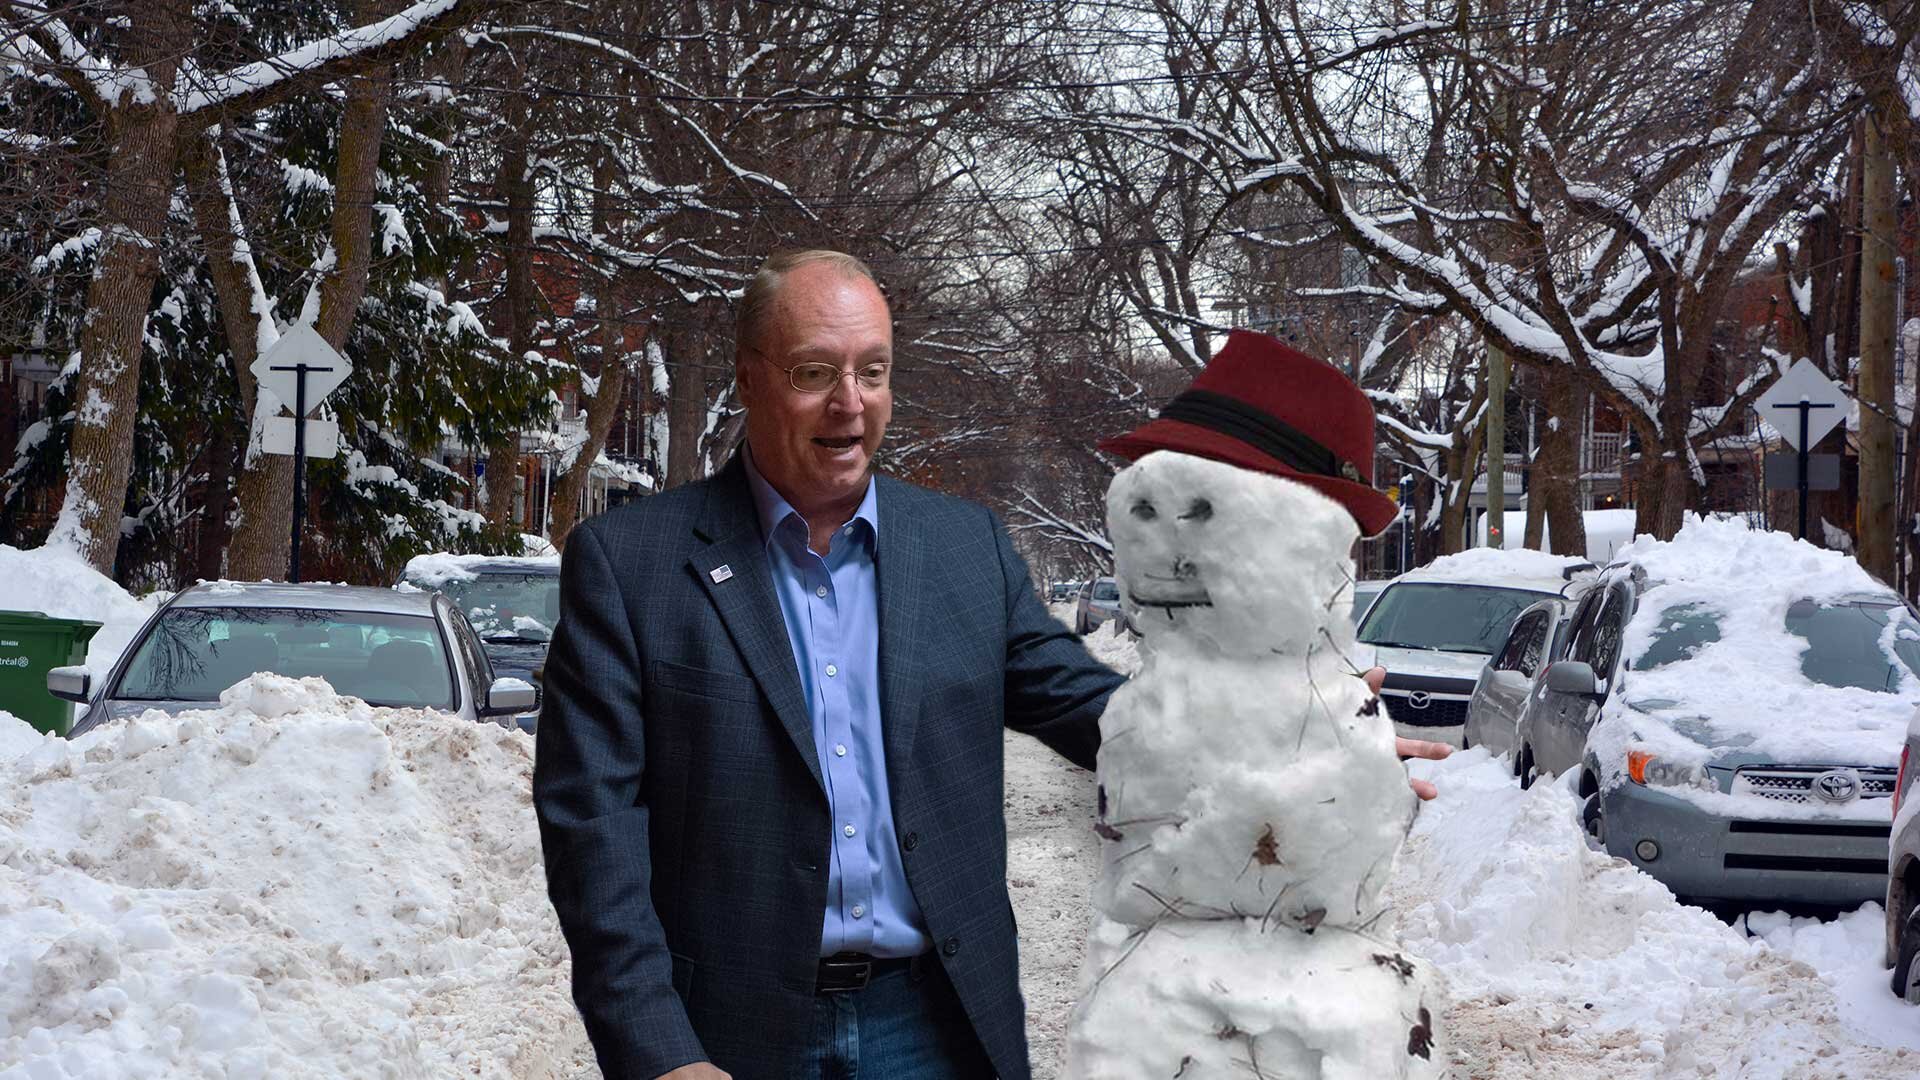 Wow!-Jim-Hagerdorn-Built-a-Snowman-and-it-Came-to-Life-and-Lectured-Him-on-Climate-Change.jpg